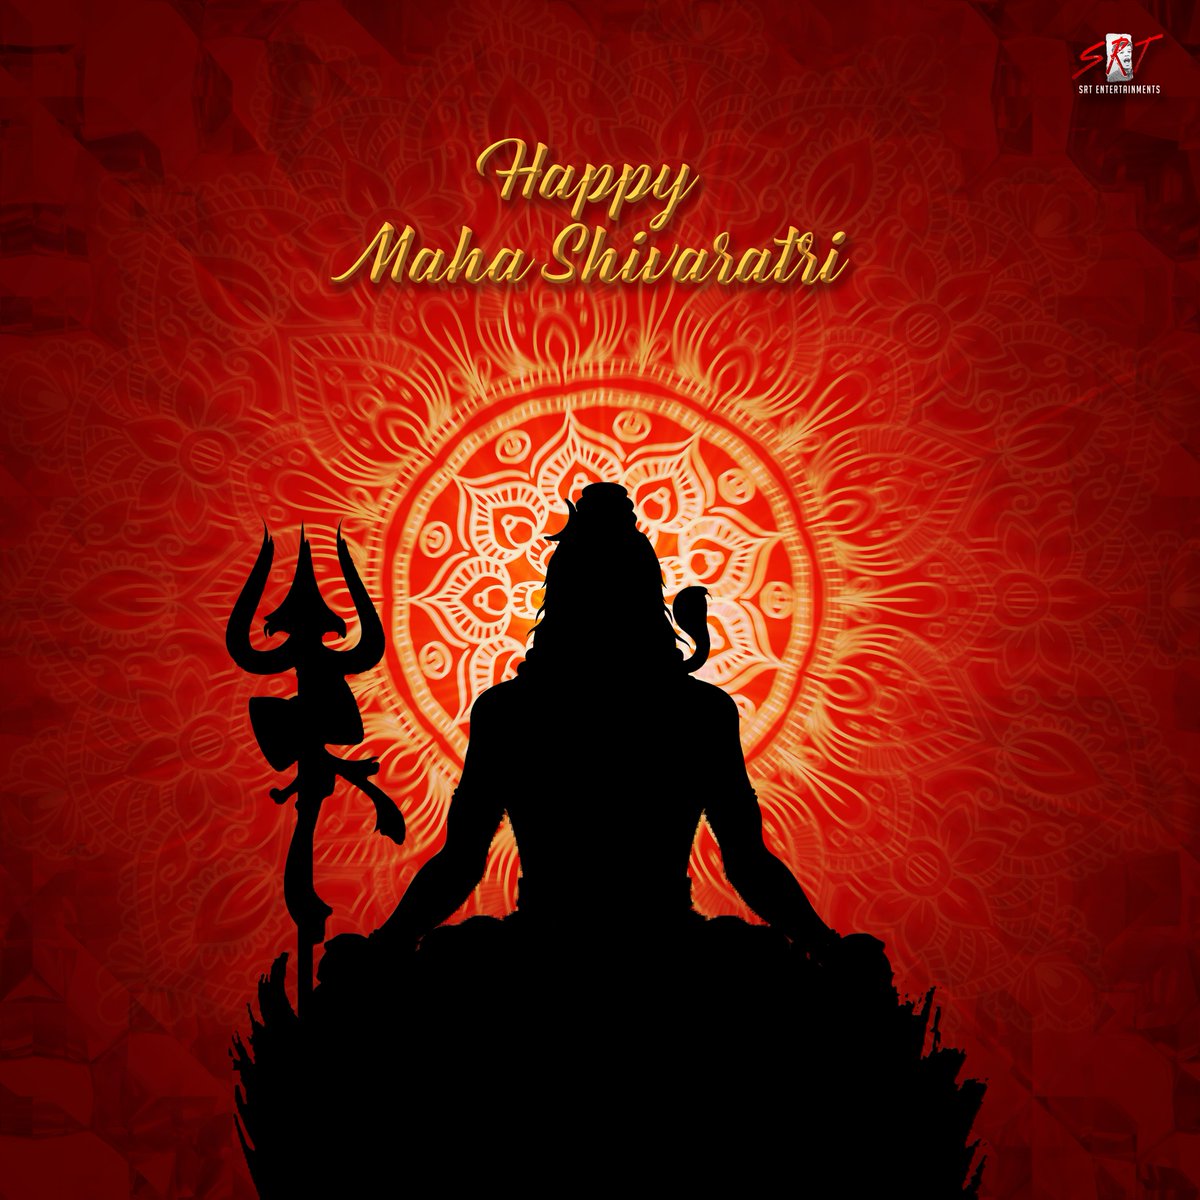 May the strength of Lord Shiva always be with you. #HappyMahaShivratri